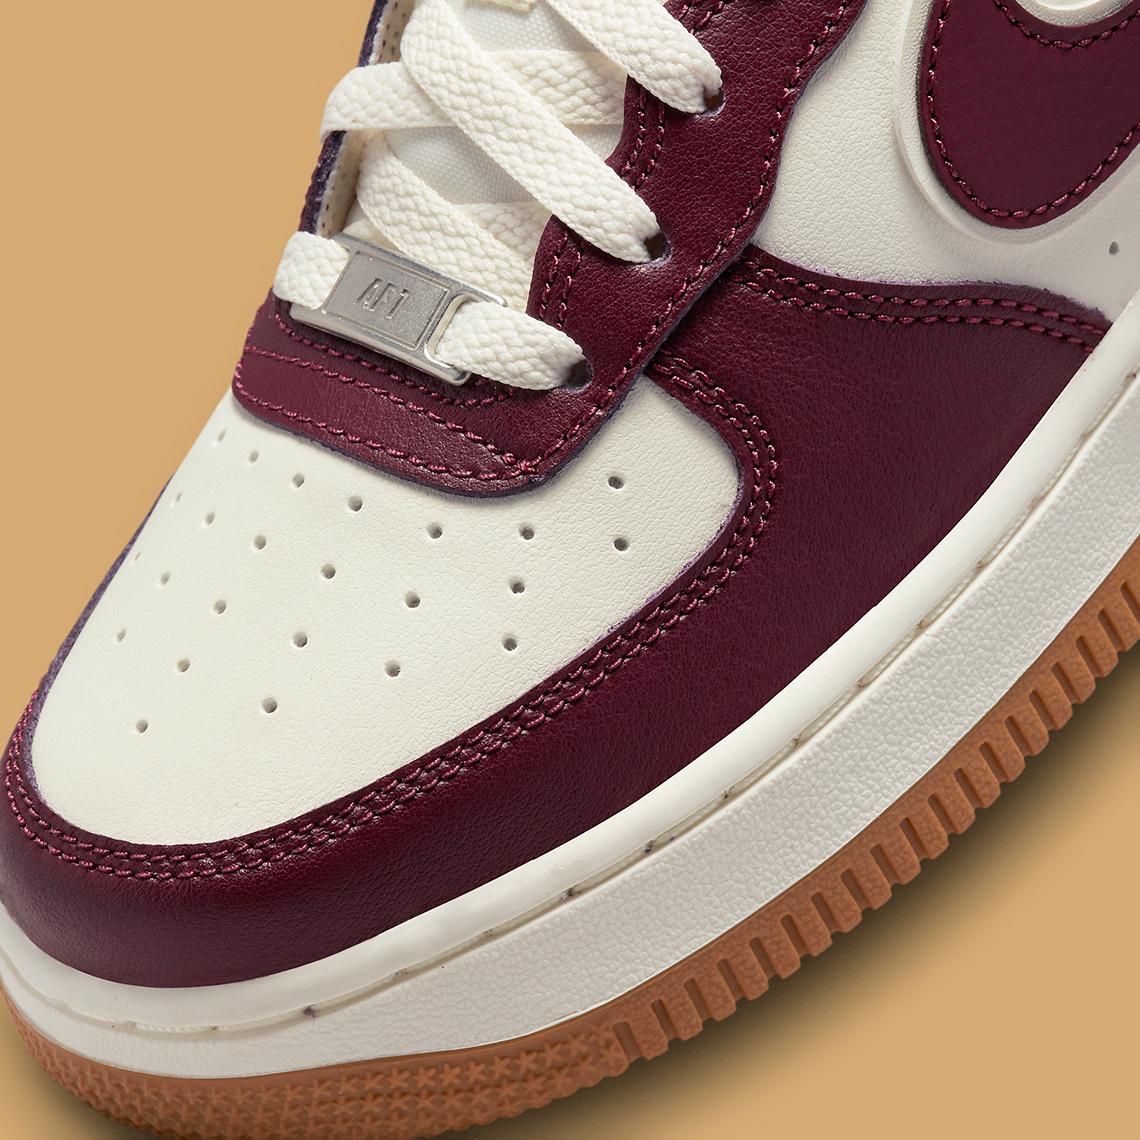 Nike Air Force 1 Low Gs Team Red Gum Dq5972 100 4